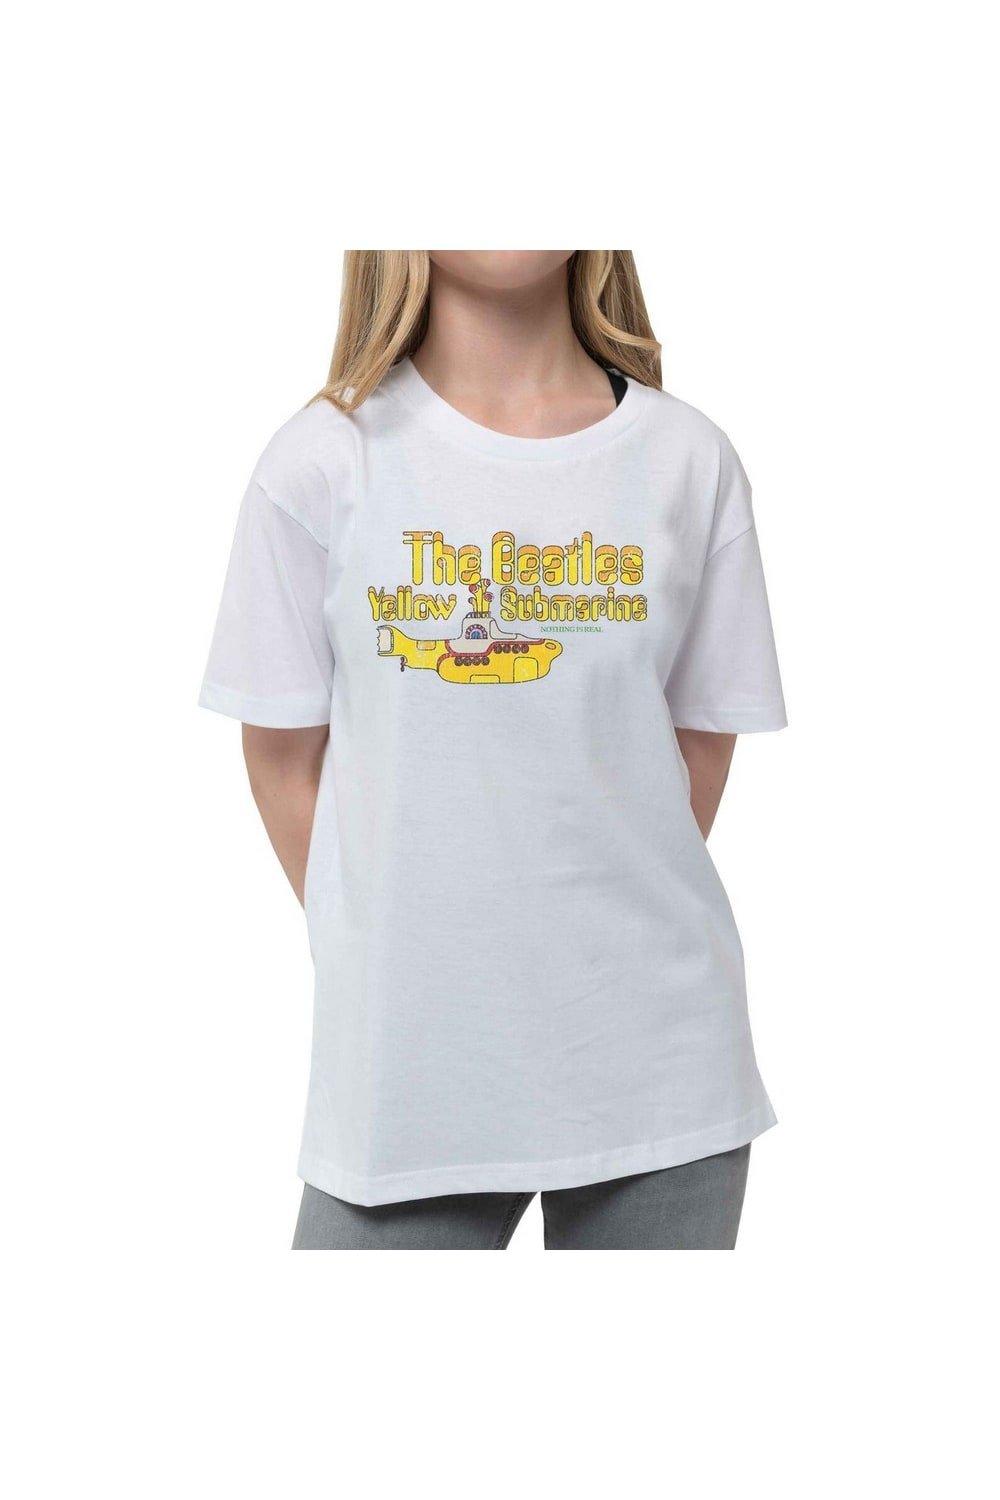 Yellow Submarine Nothing Is Real T-Shirt